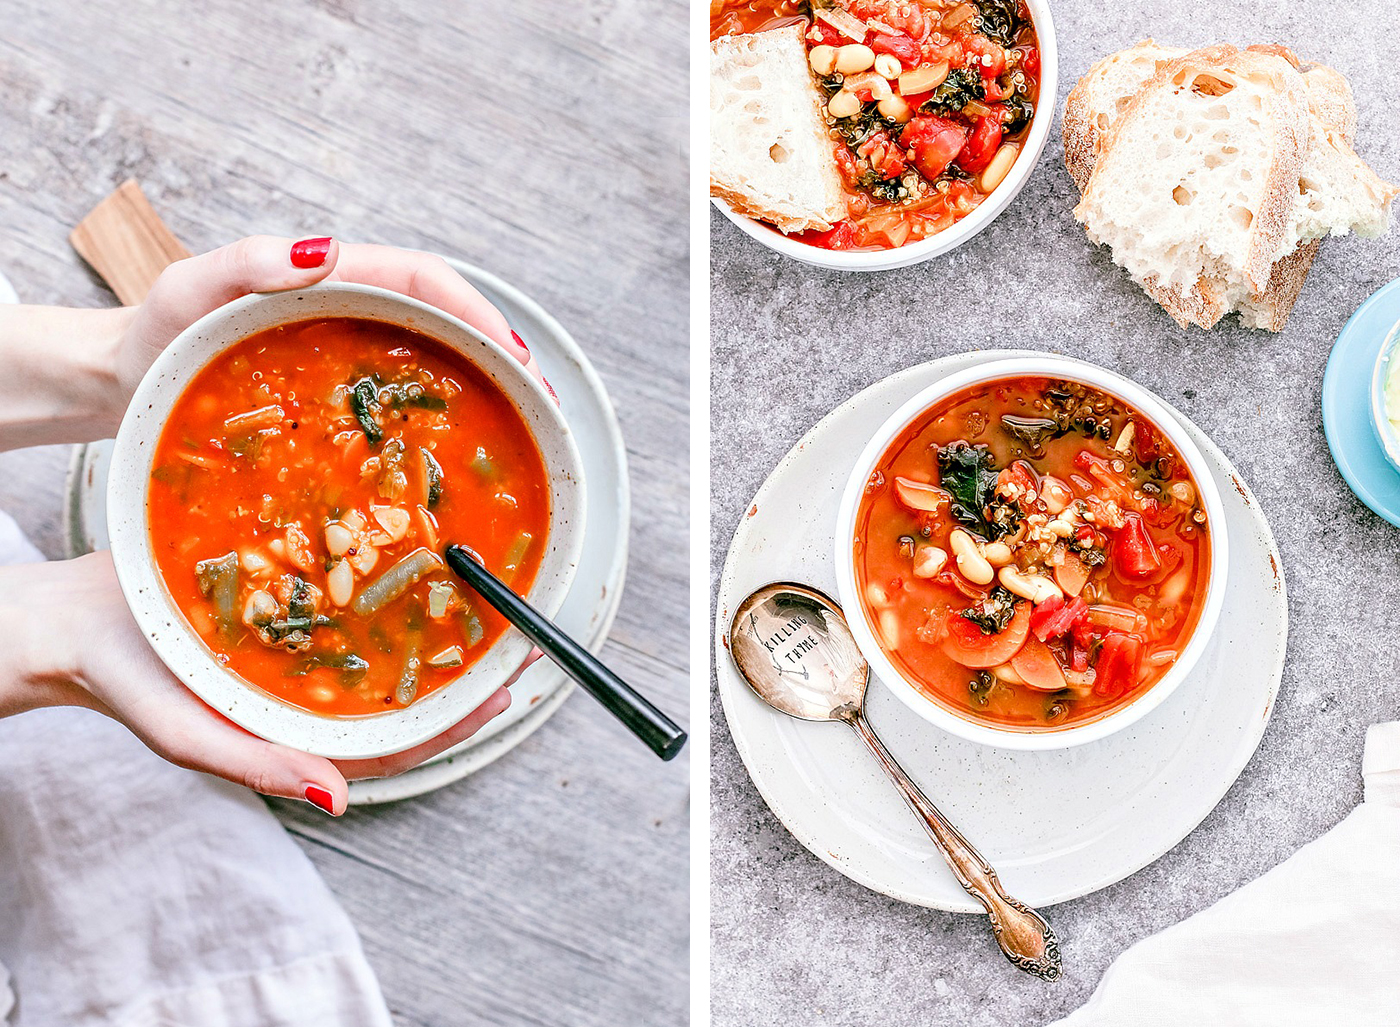 Left: Hands holding bowl of quinoa soup; Right: Bowls of southwestern kale soup with a fresh hunk of bread.